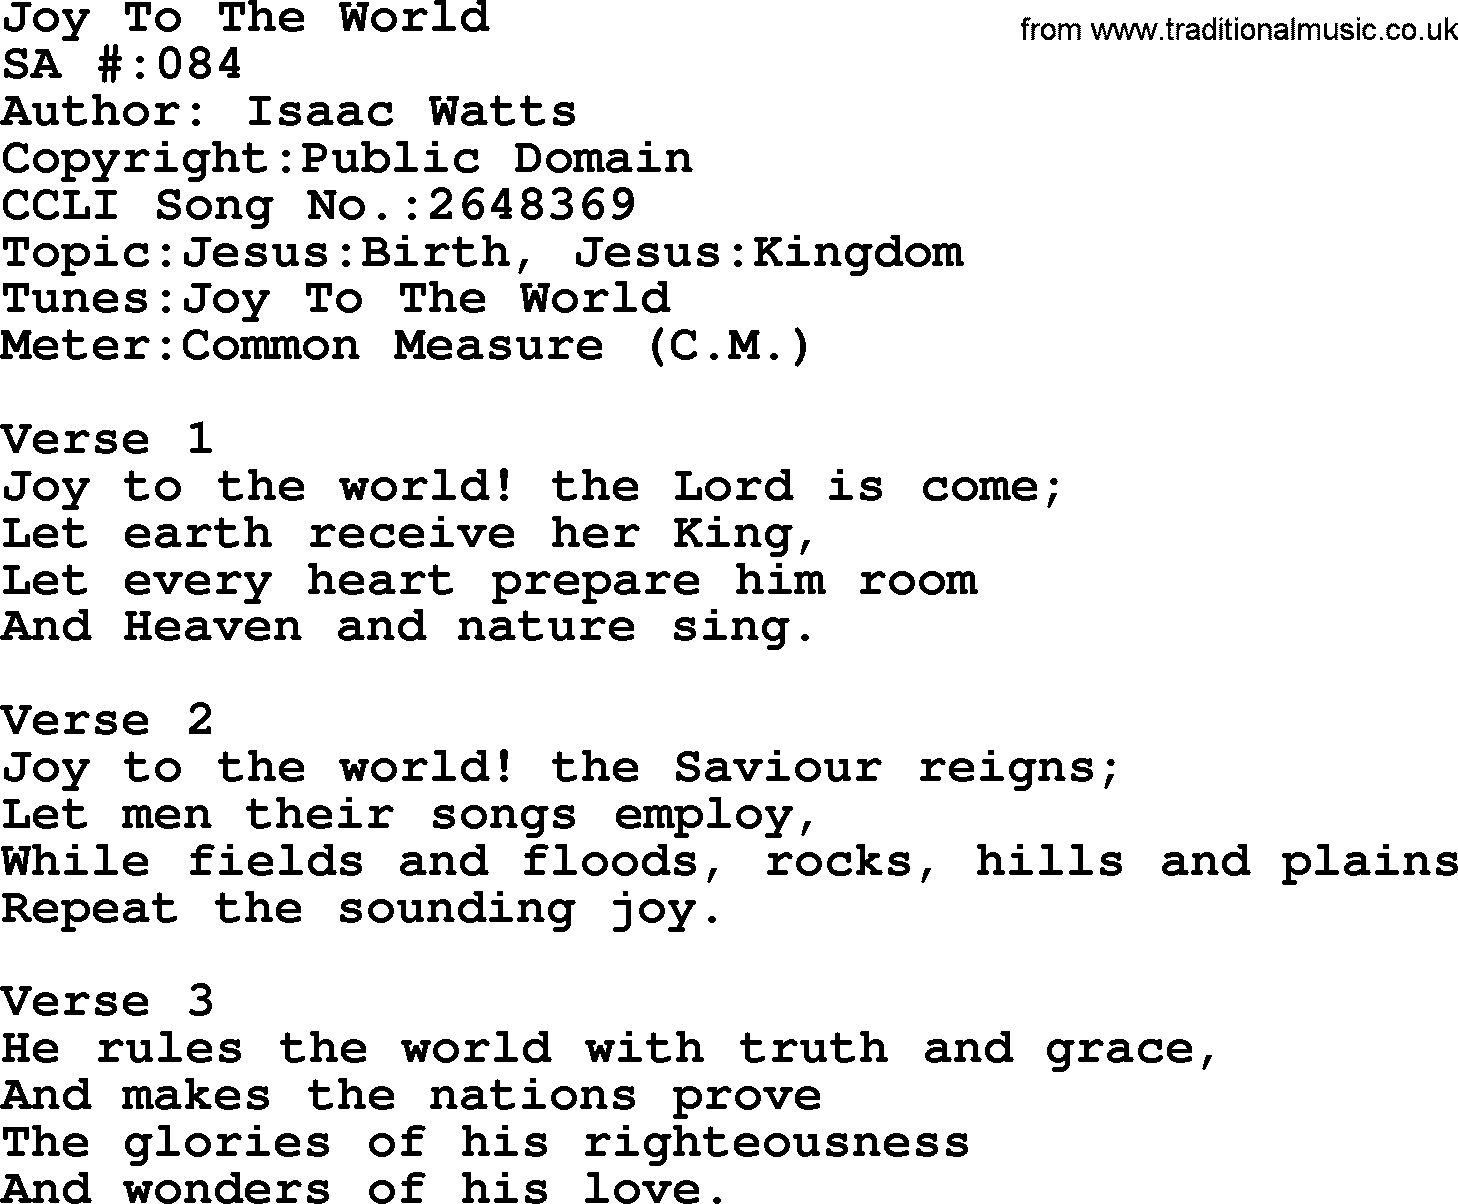 Salvation Army Hymnal, title: Joy To The World, with lyrics and PDF,